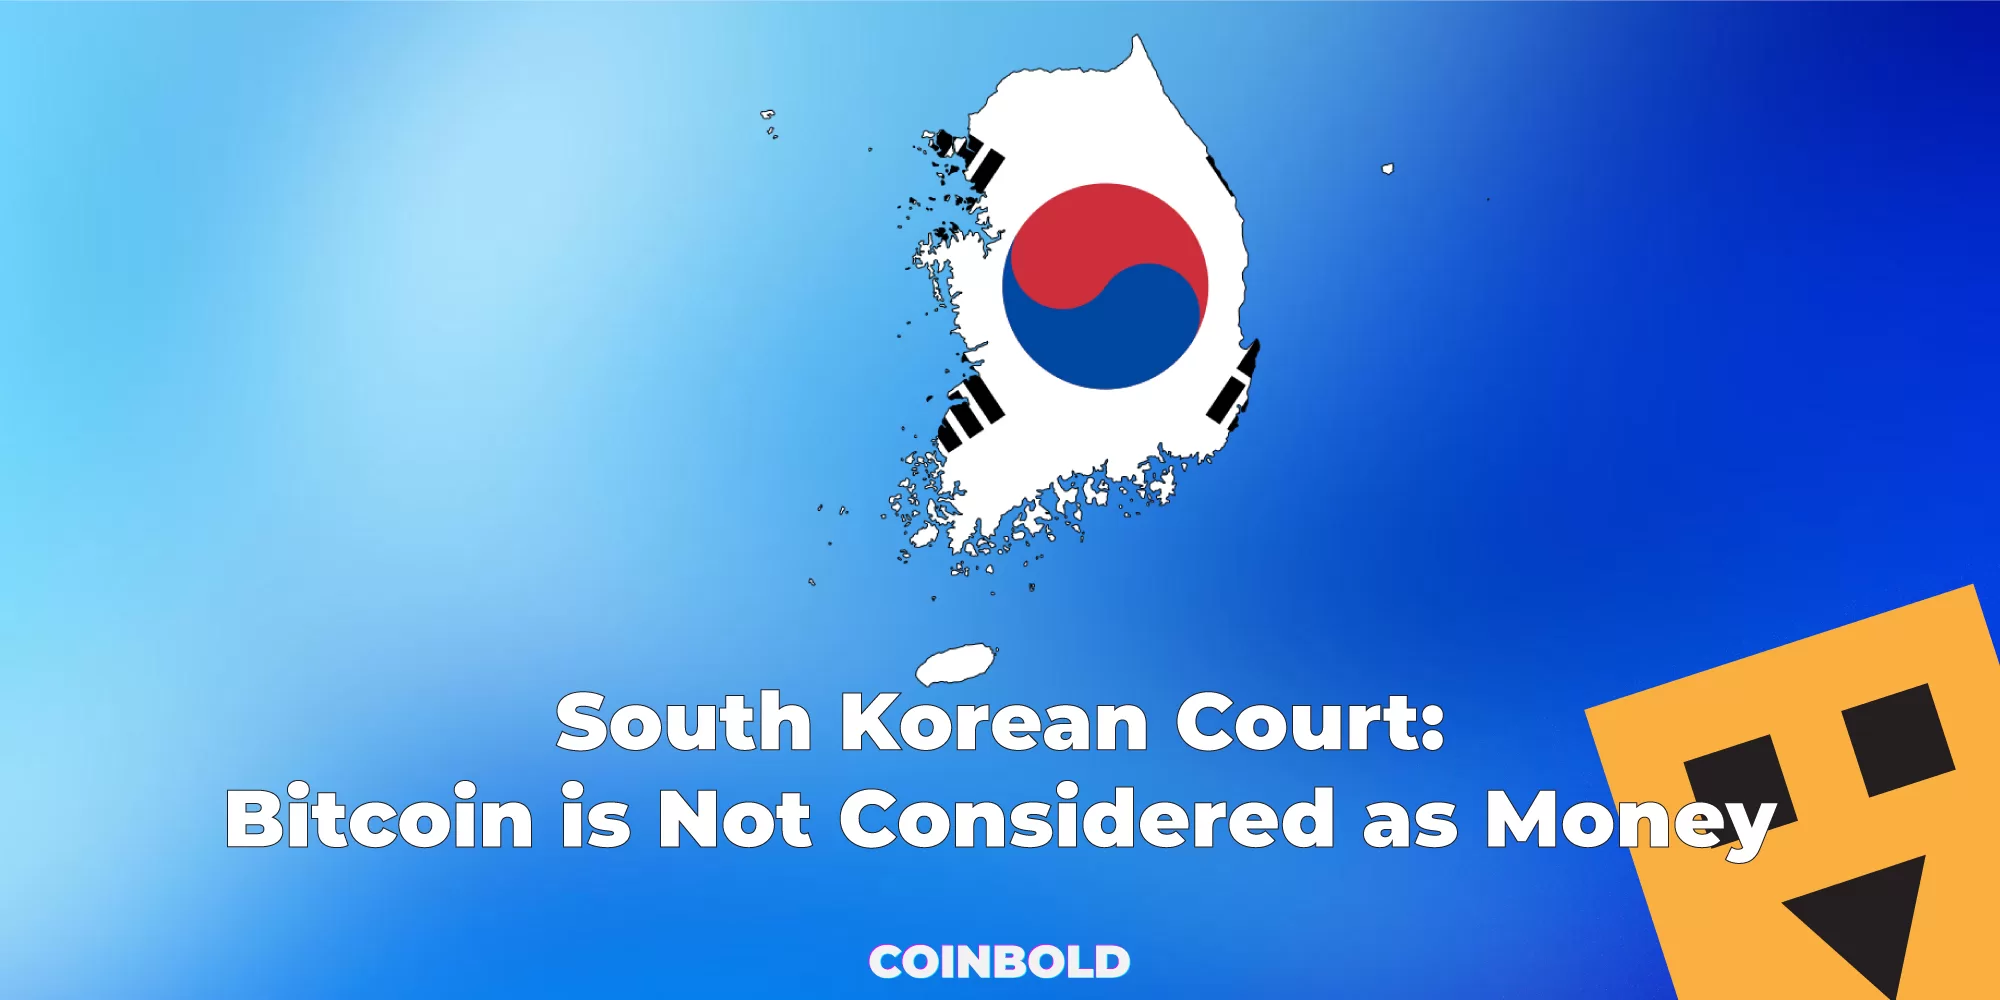 South Korean Court: Bitcoin is Not Considered as Money